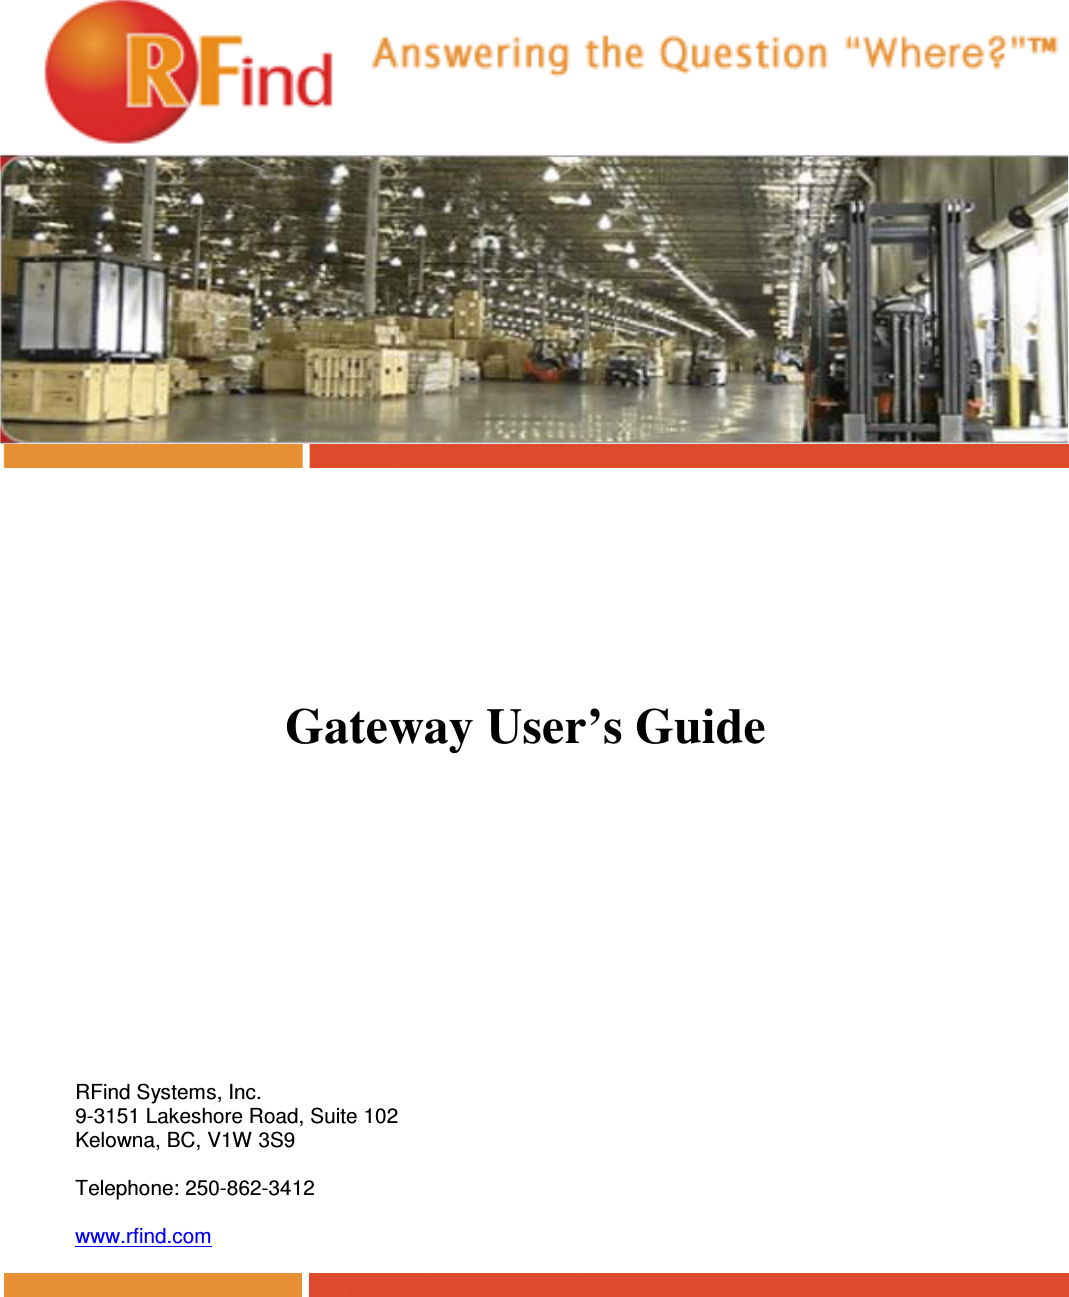         Gateway User’s Guide         RFind Systems, Inc. 9-3151 Lakeshore Road, Suite 102 Kelowna, BC, V1W 3S9  Telephone: 250-862-3412  www.rfind.com   